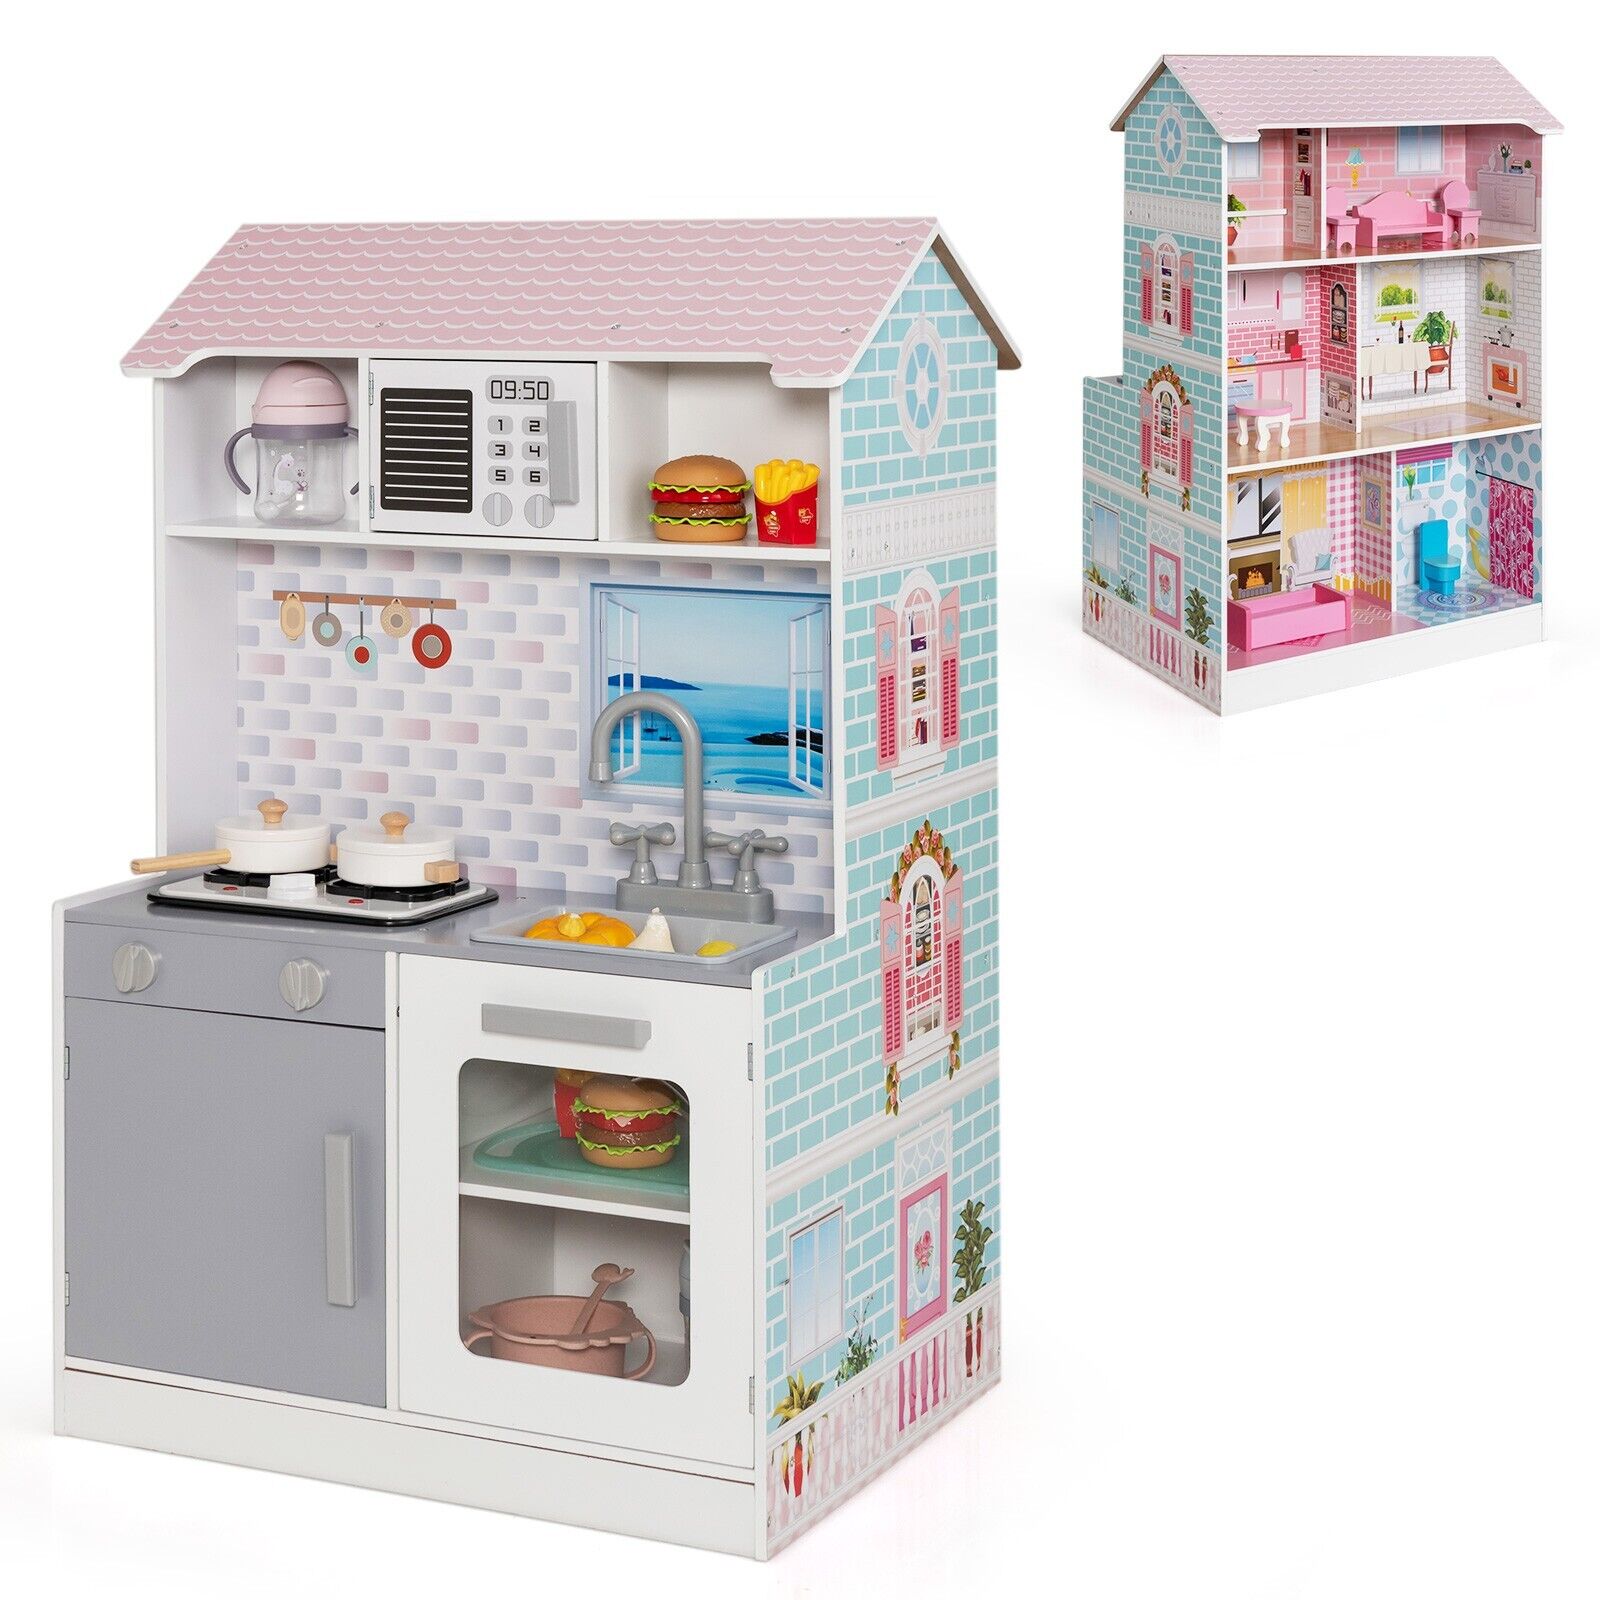 2 in 1 Kids Toy Kitchen and Dollhouse for 3+ Years Old Children